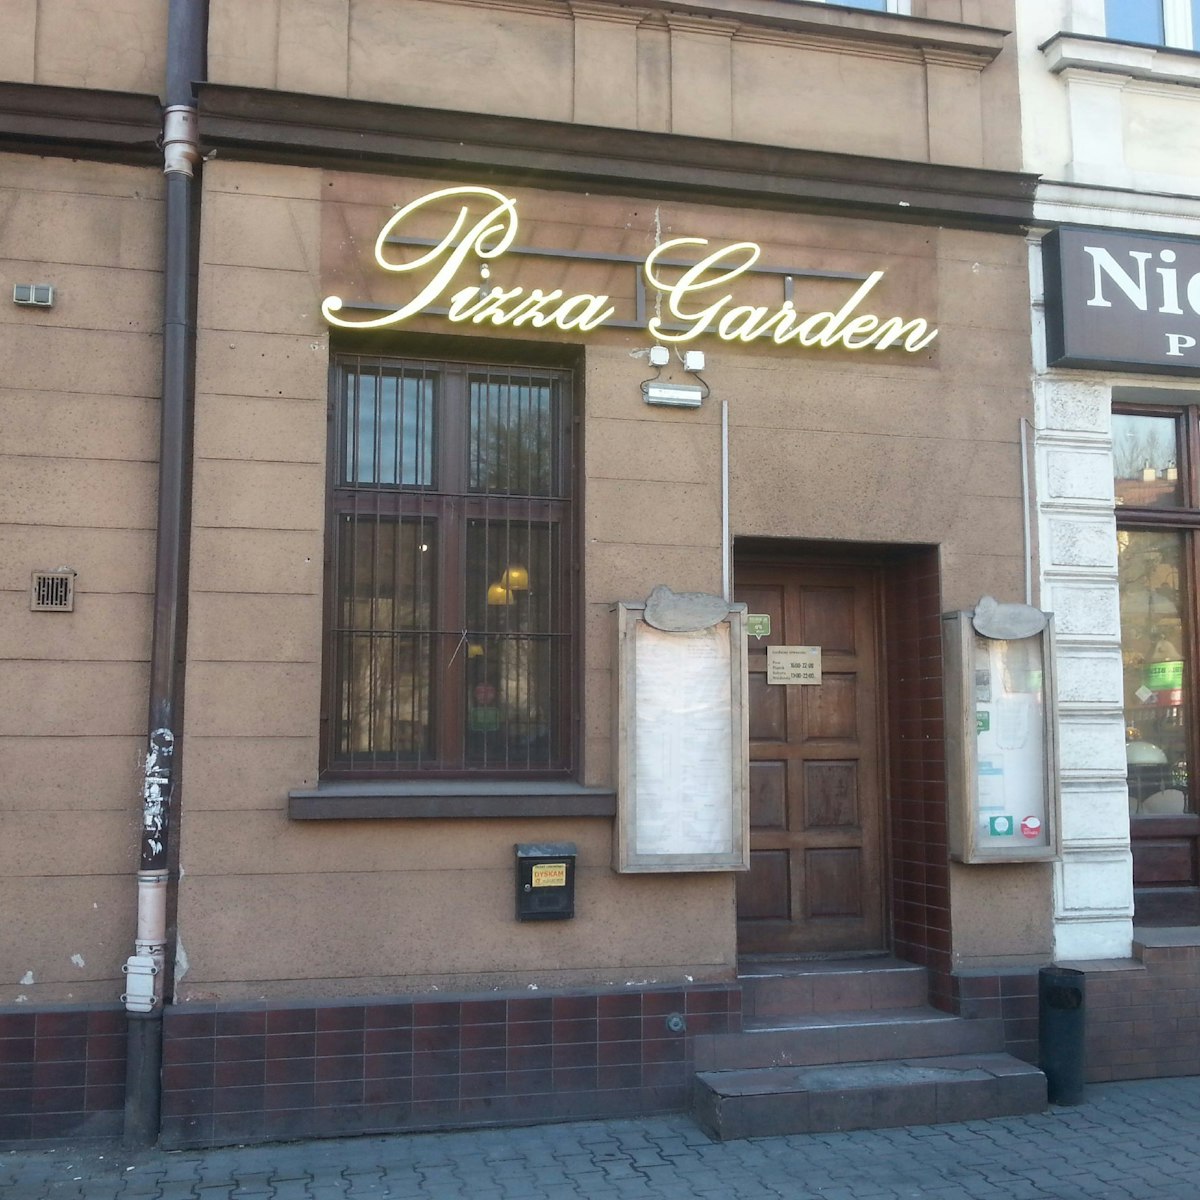 Pizza Garden, across the river located in an assuming spot you'll find this, arguably the best pizza place in Krakow